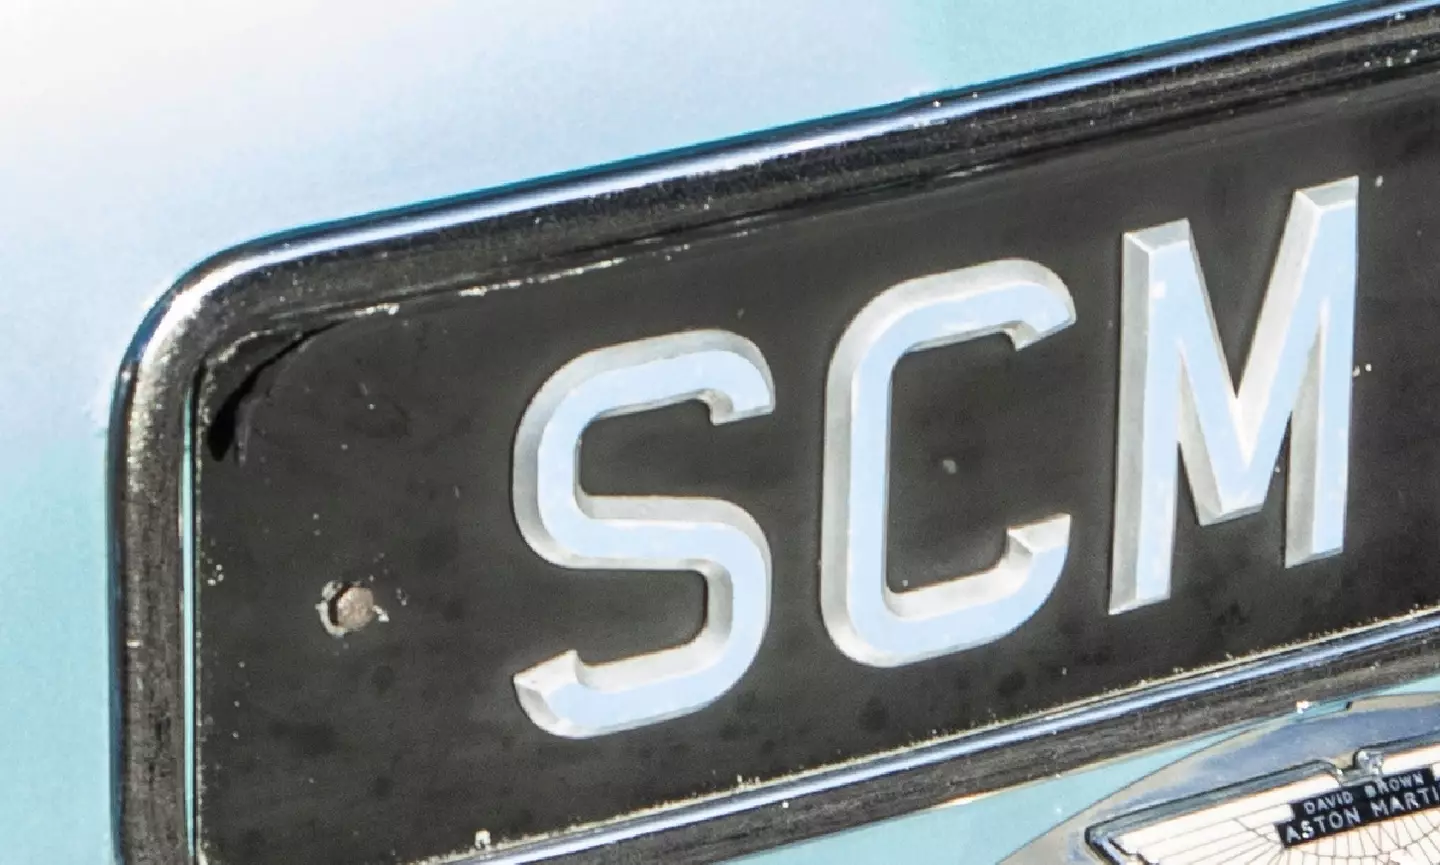 Every six months the DVLA draws up a list of banned number plates.